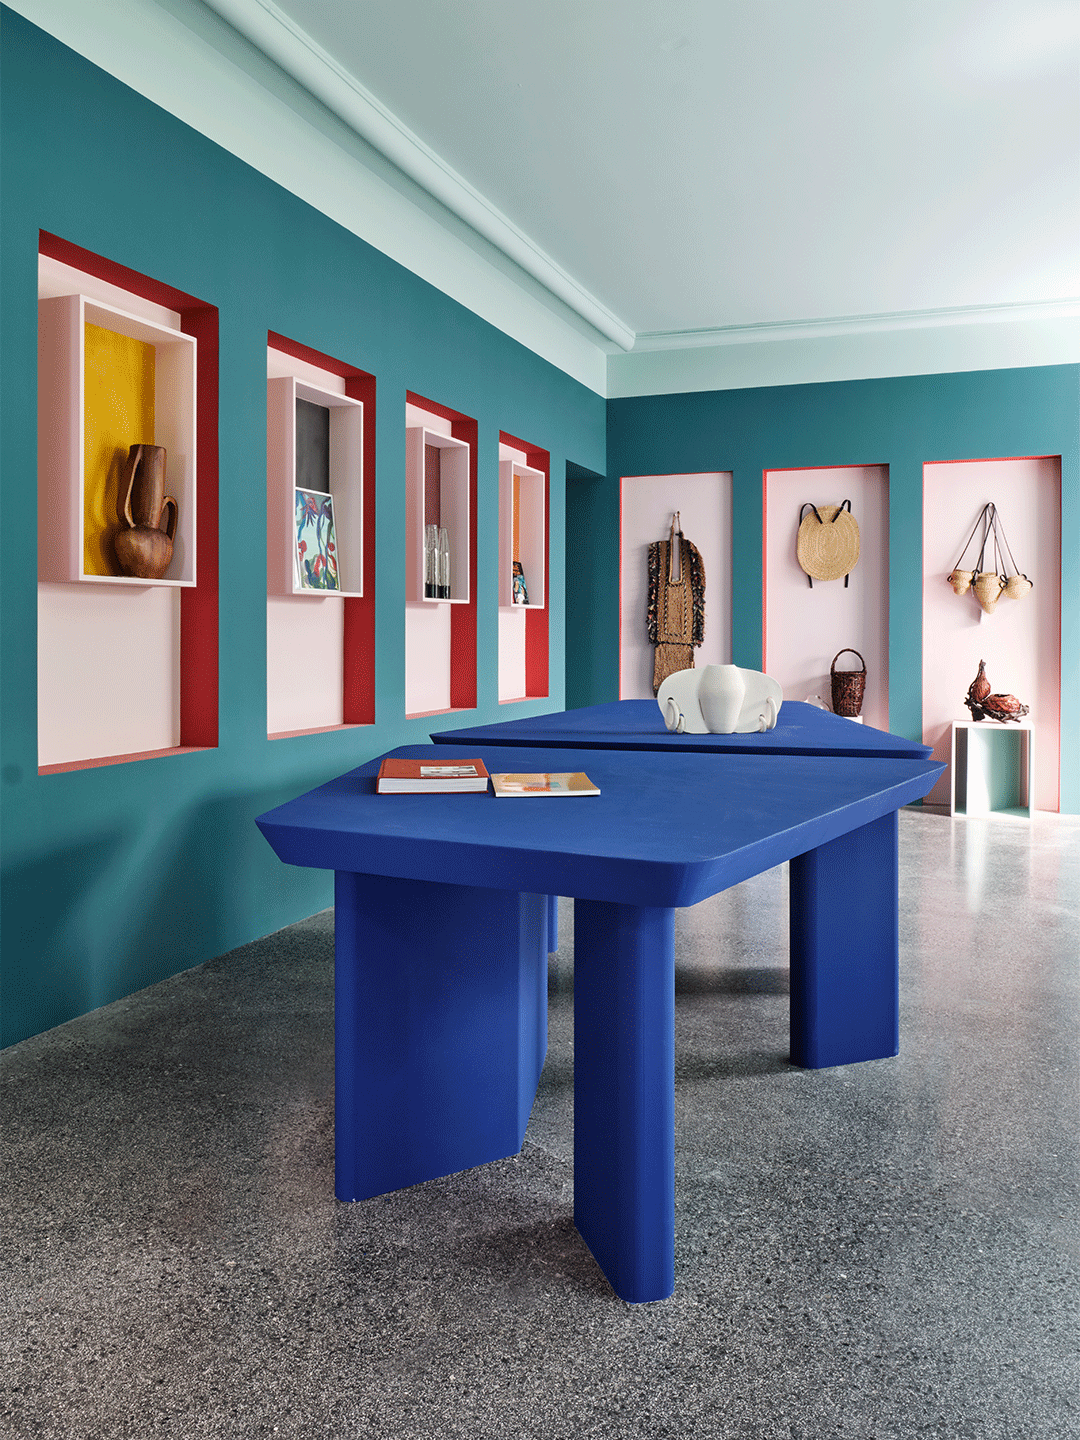 The boutique at Villa Noailles by Pierre Yovanovitch